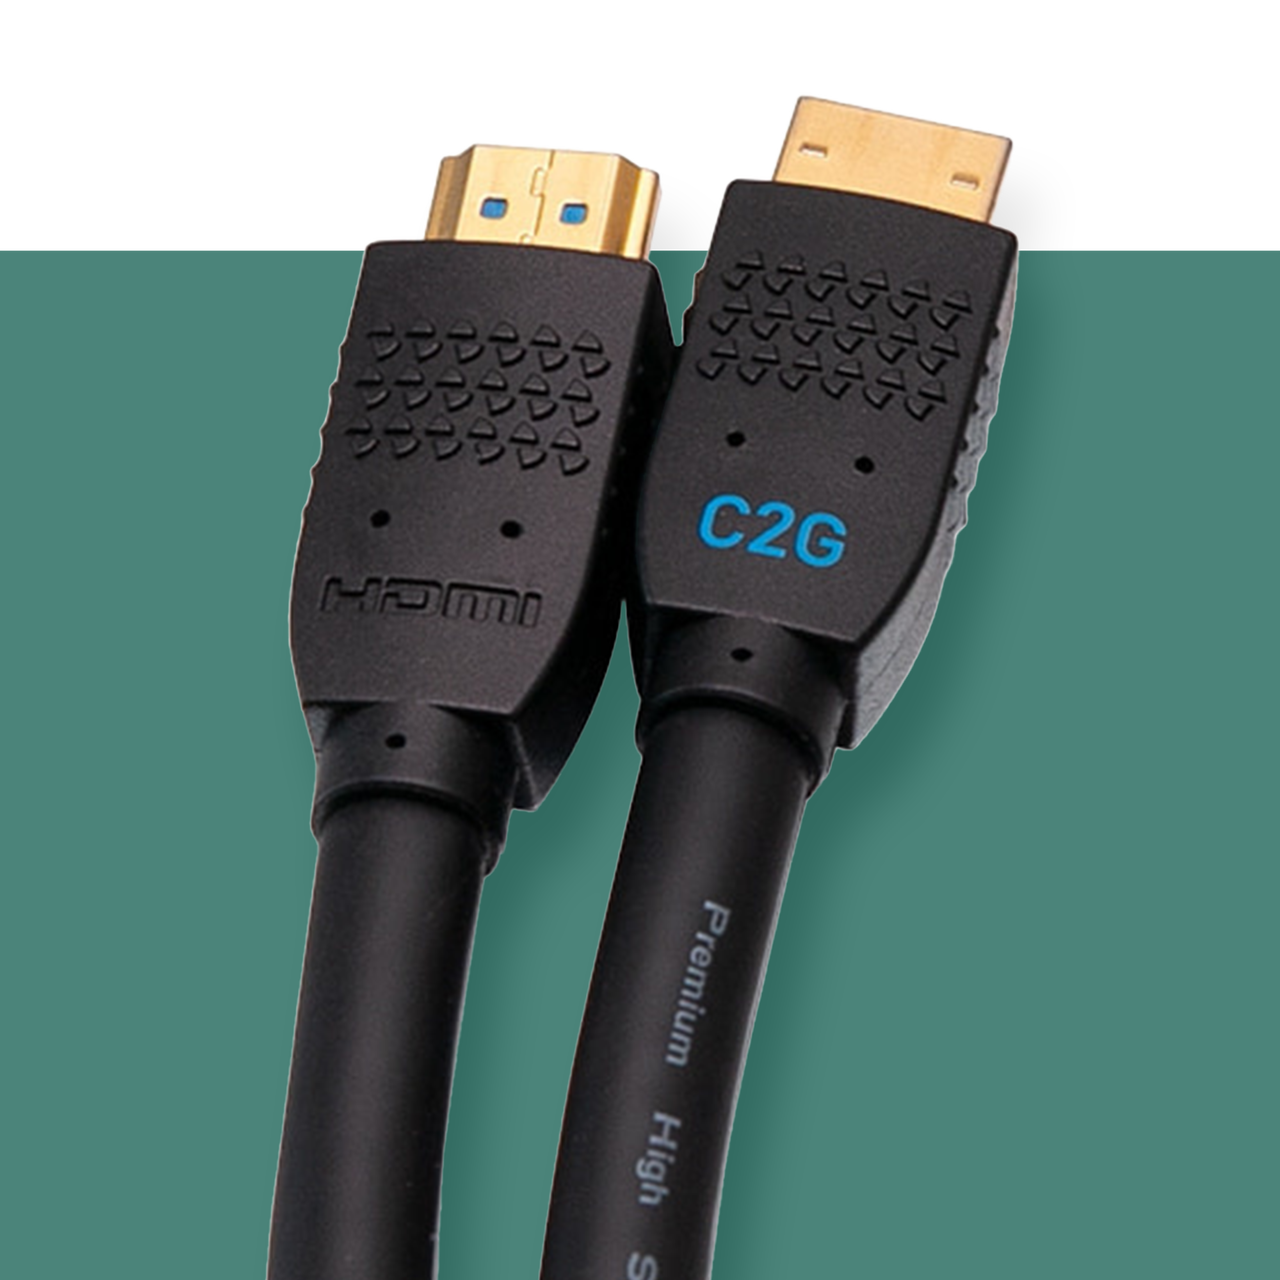 Two C2G HDMI cables on a green background